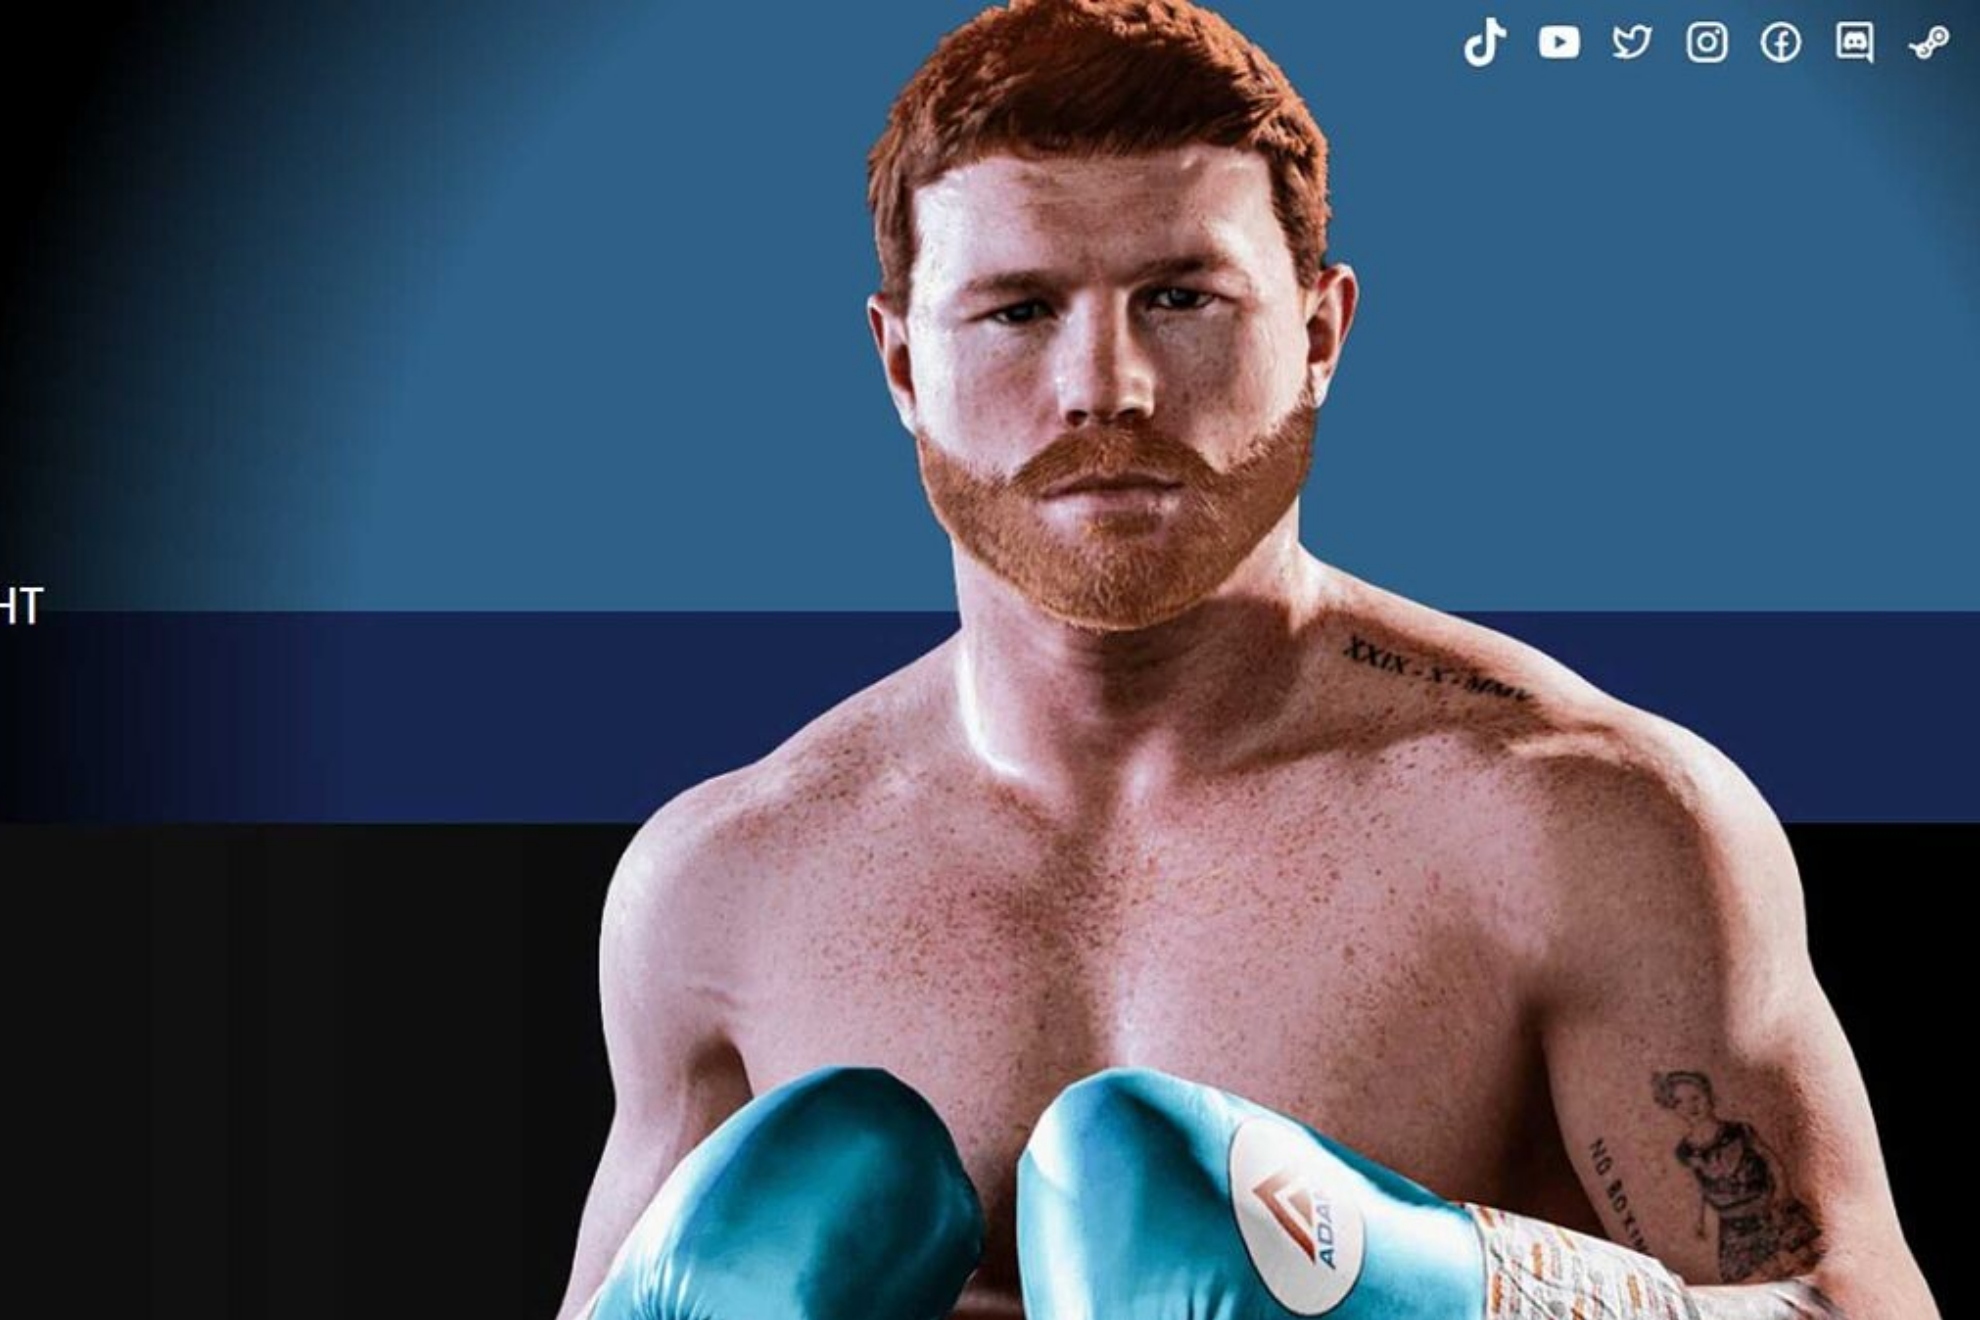 Canelo Alvarez will be an unlockable character in the Undisputed video game, when will it be released?